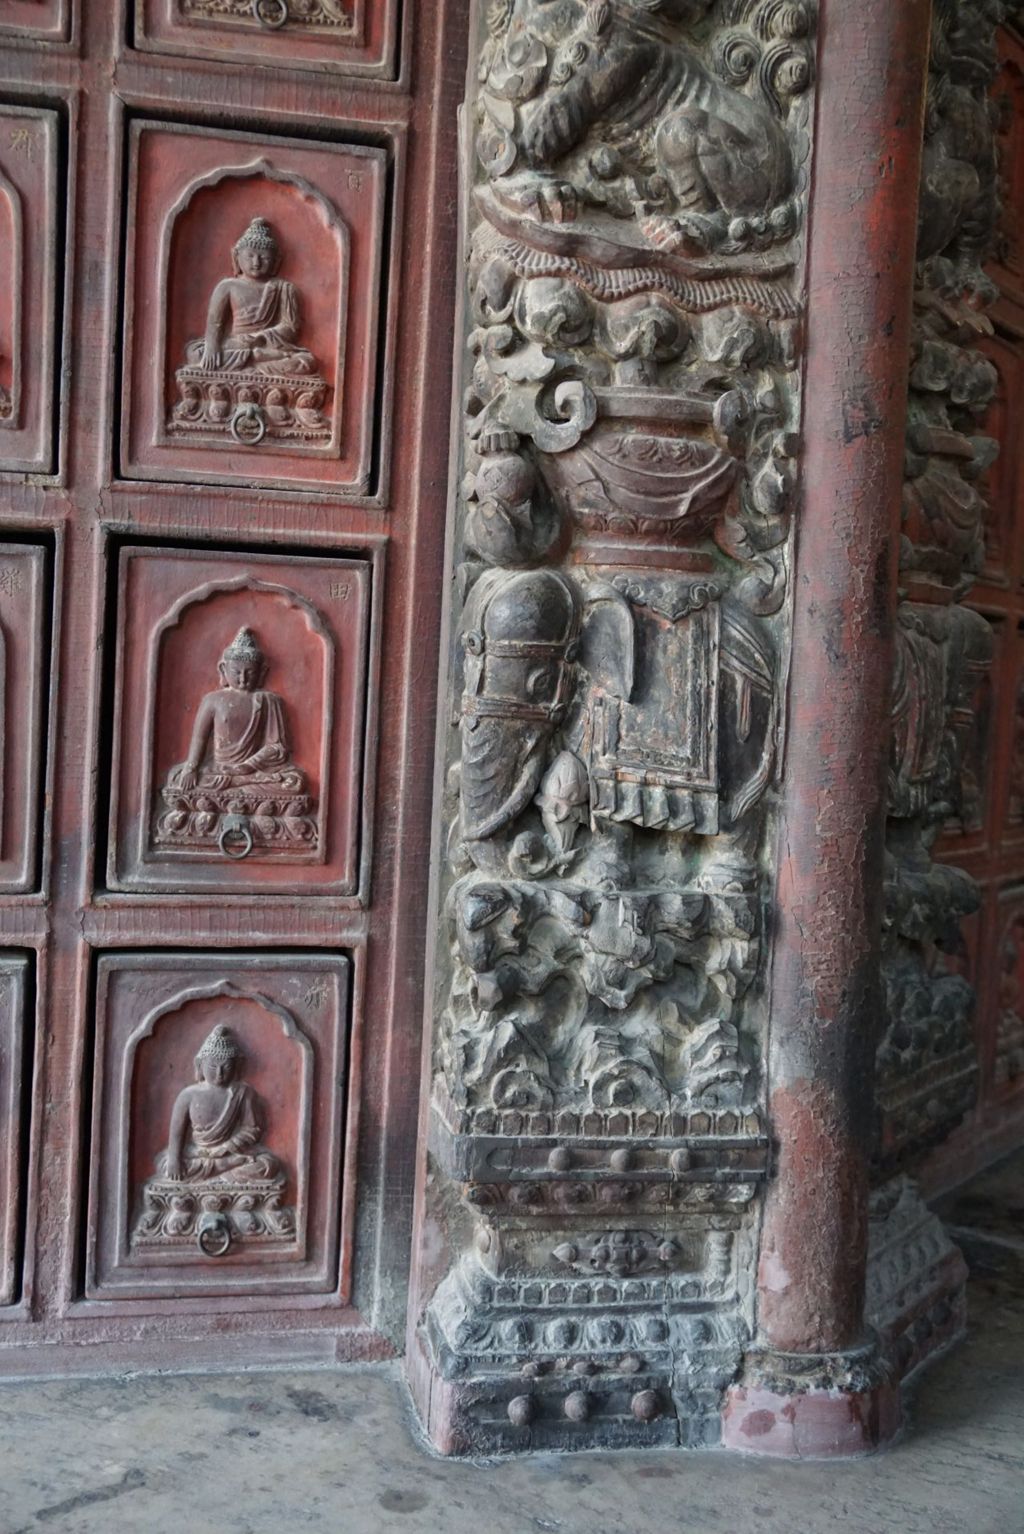 Miniature of Revolving Sutra Cabinet (Zhuanlun Jingzang, or Scripture Cabinet) in Sutra Hall (Zangdian, or Scripture Hall), elephanet figure on the column